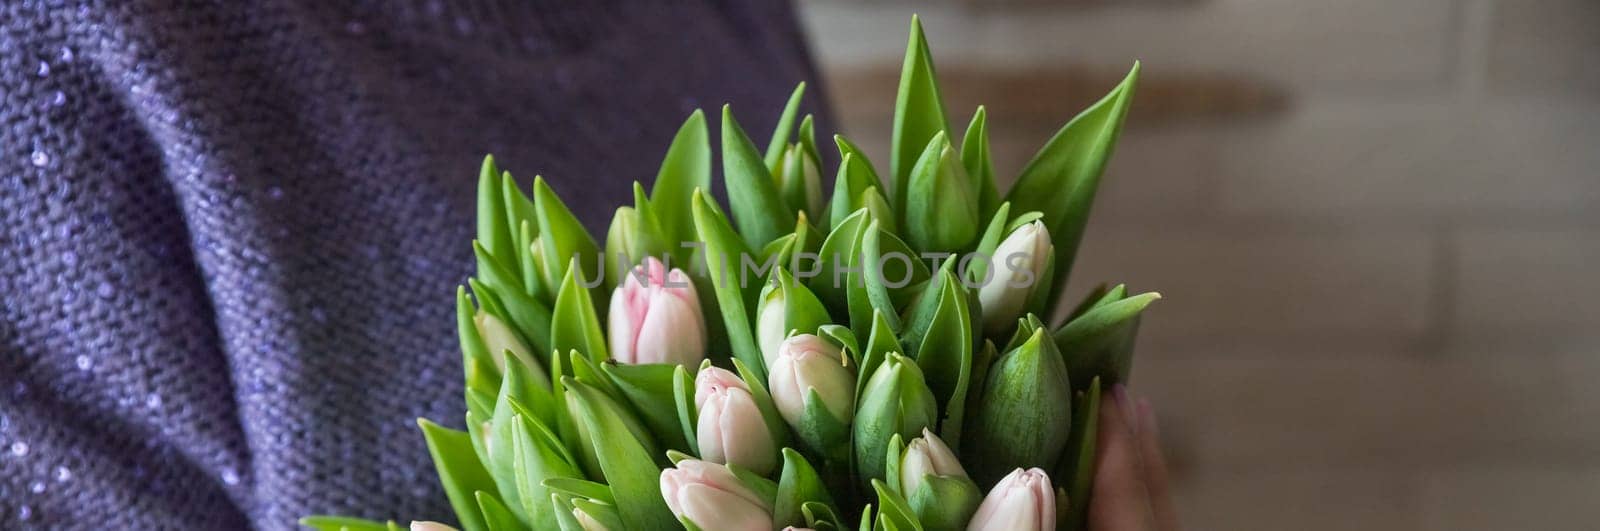 Woman holding bouquet of pink tulips against beige background, big and beautiful bunch of fresh red tulips, cropped photo, bouquet close up.Floral spring background. by YuliaYaspe1979